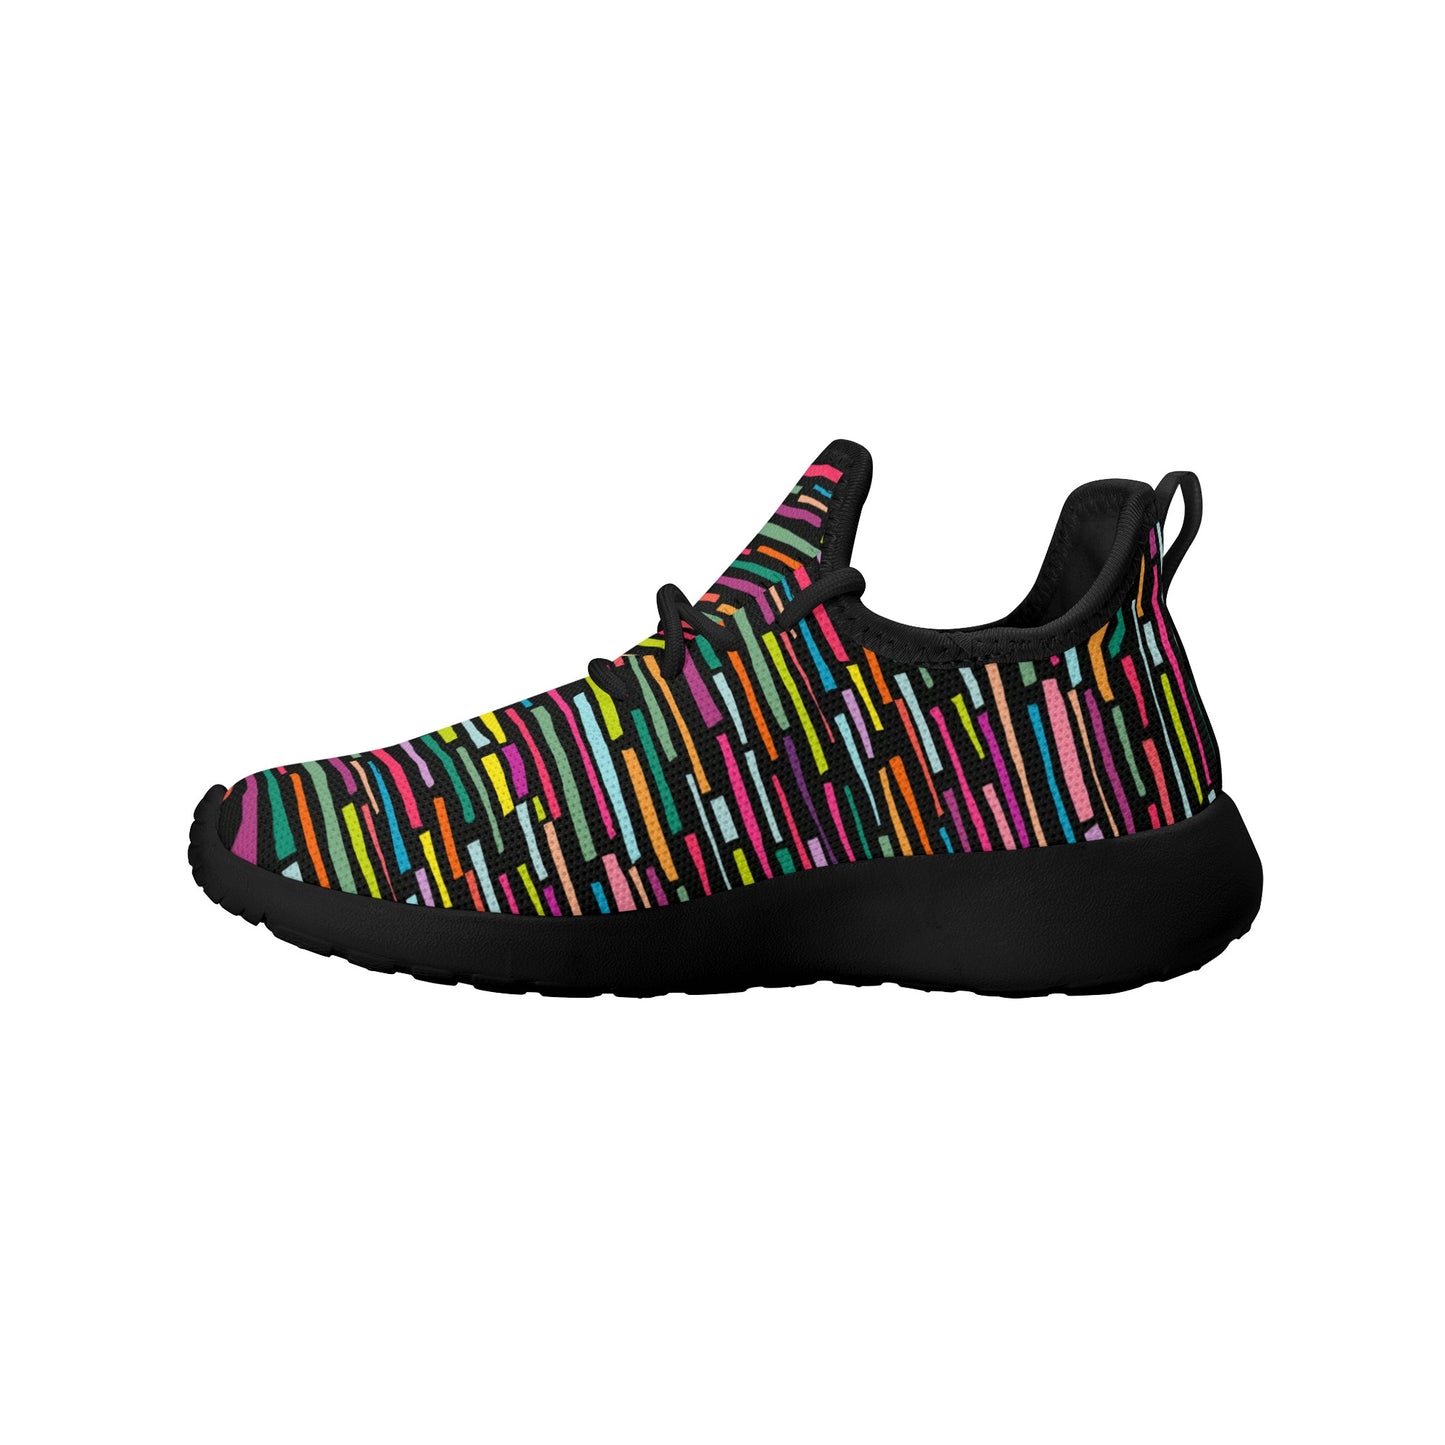 Inverted Lines of Color - Kids Mesh Knit Sneakers